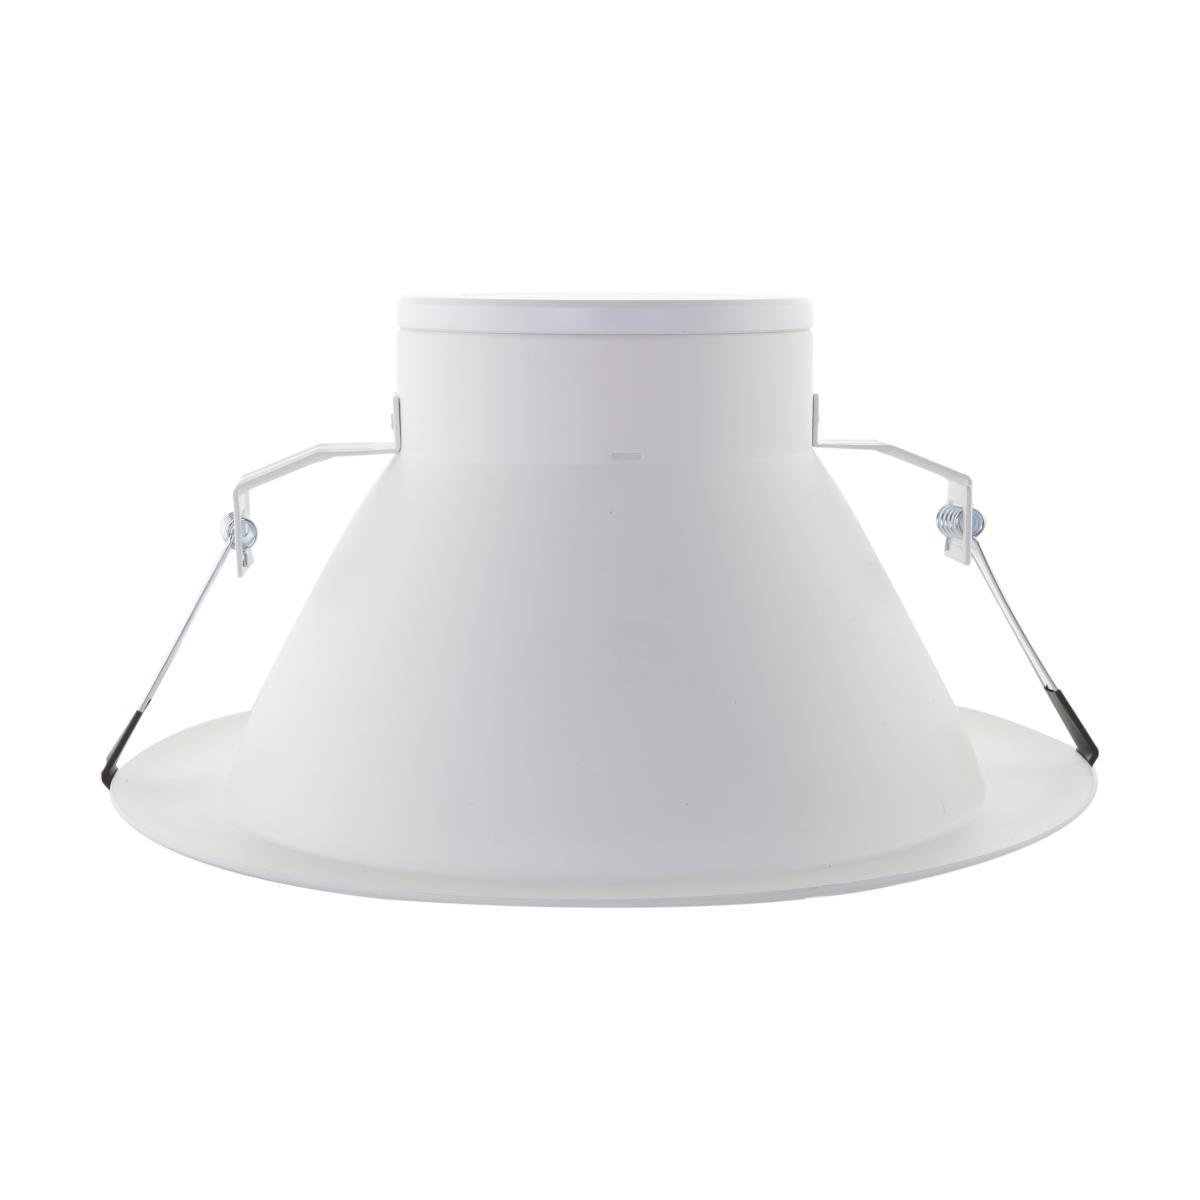 10 In. Commercial Canless LED Recessed Light, 46 Watt, 3500 Lumens, Selectable CCT, 2700K to 5000K, White Finish